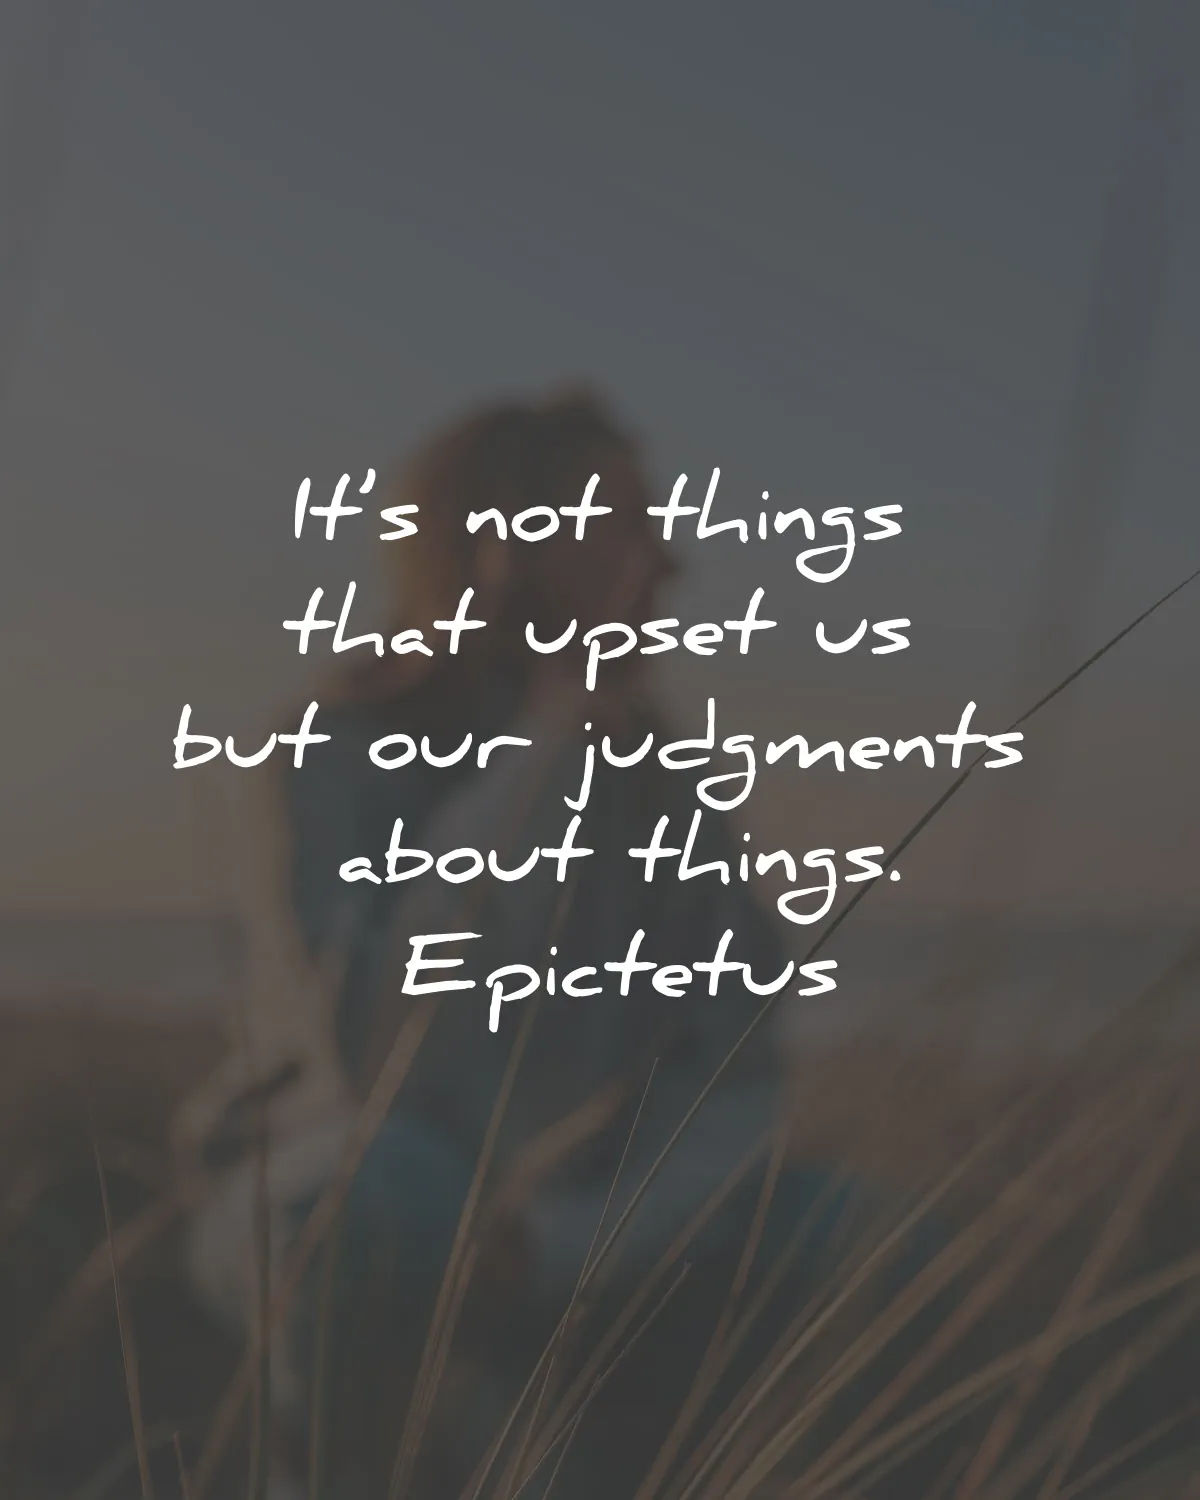 epictetus quotes not things upset judgments things wisdom